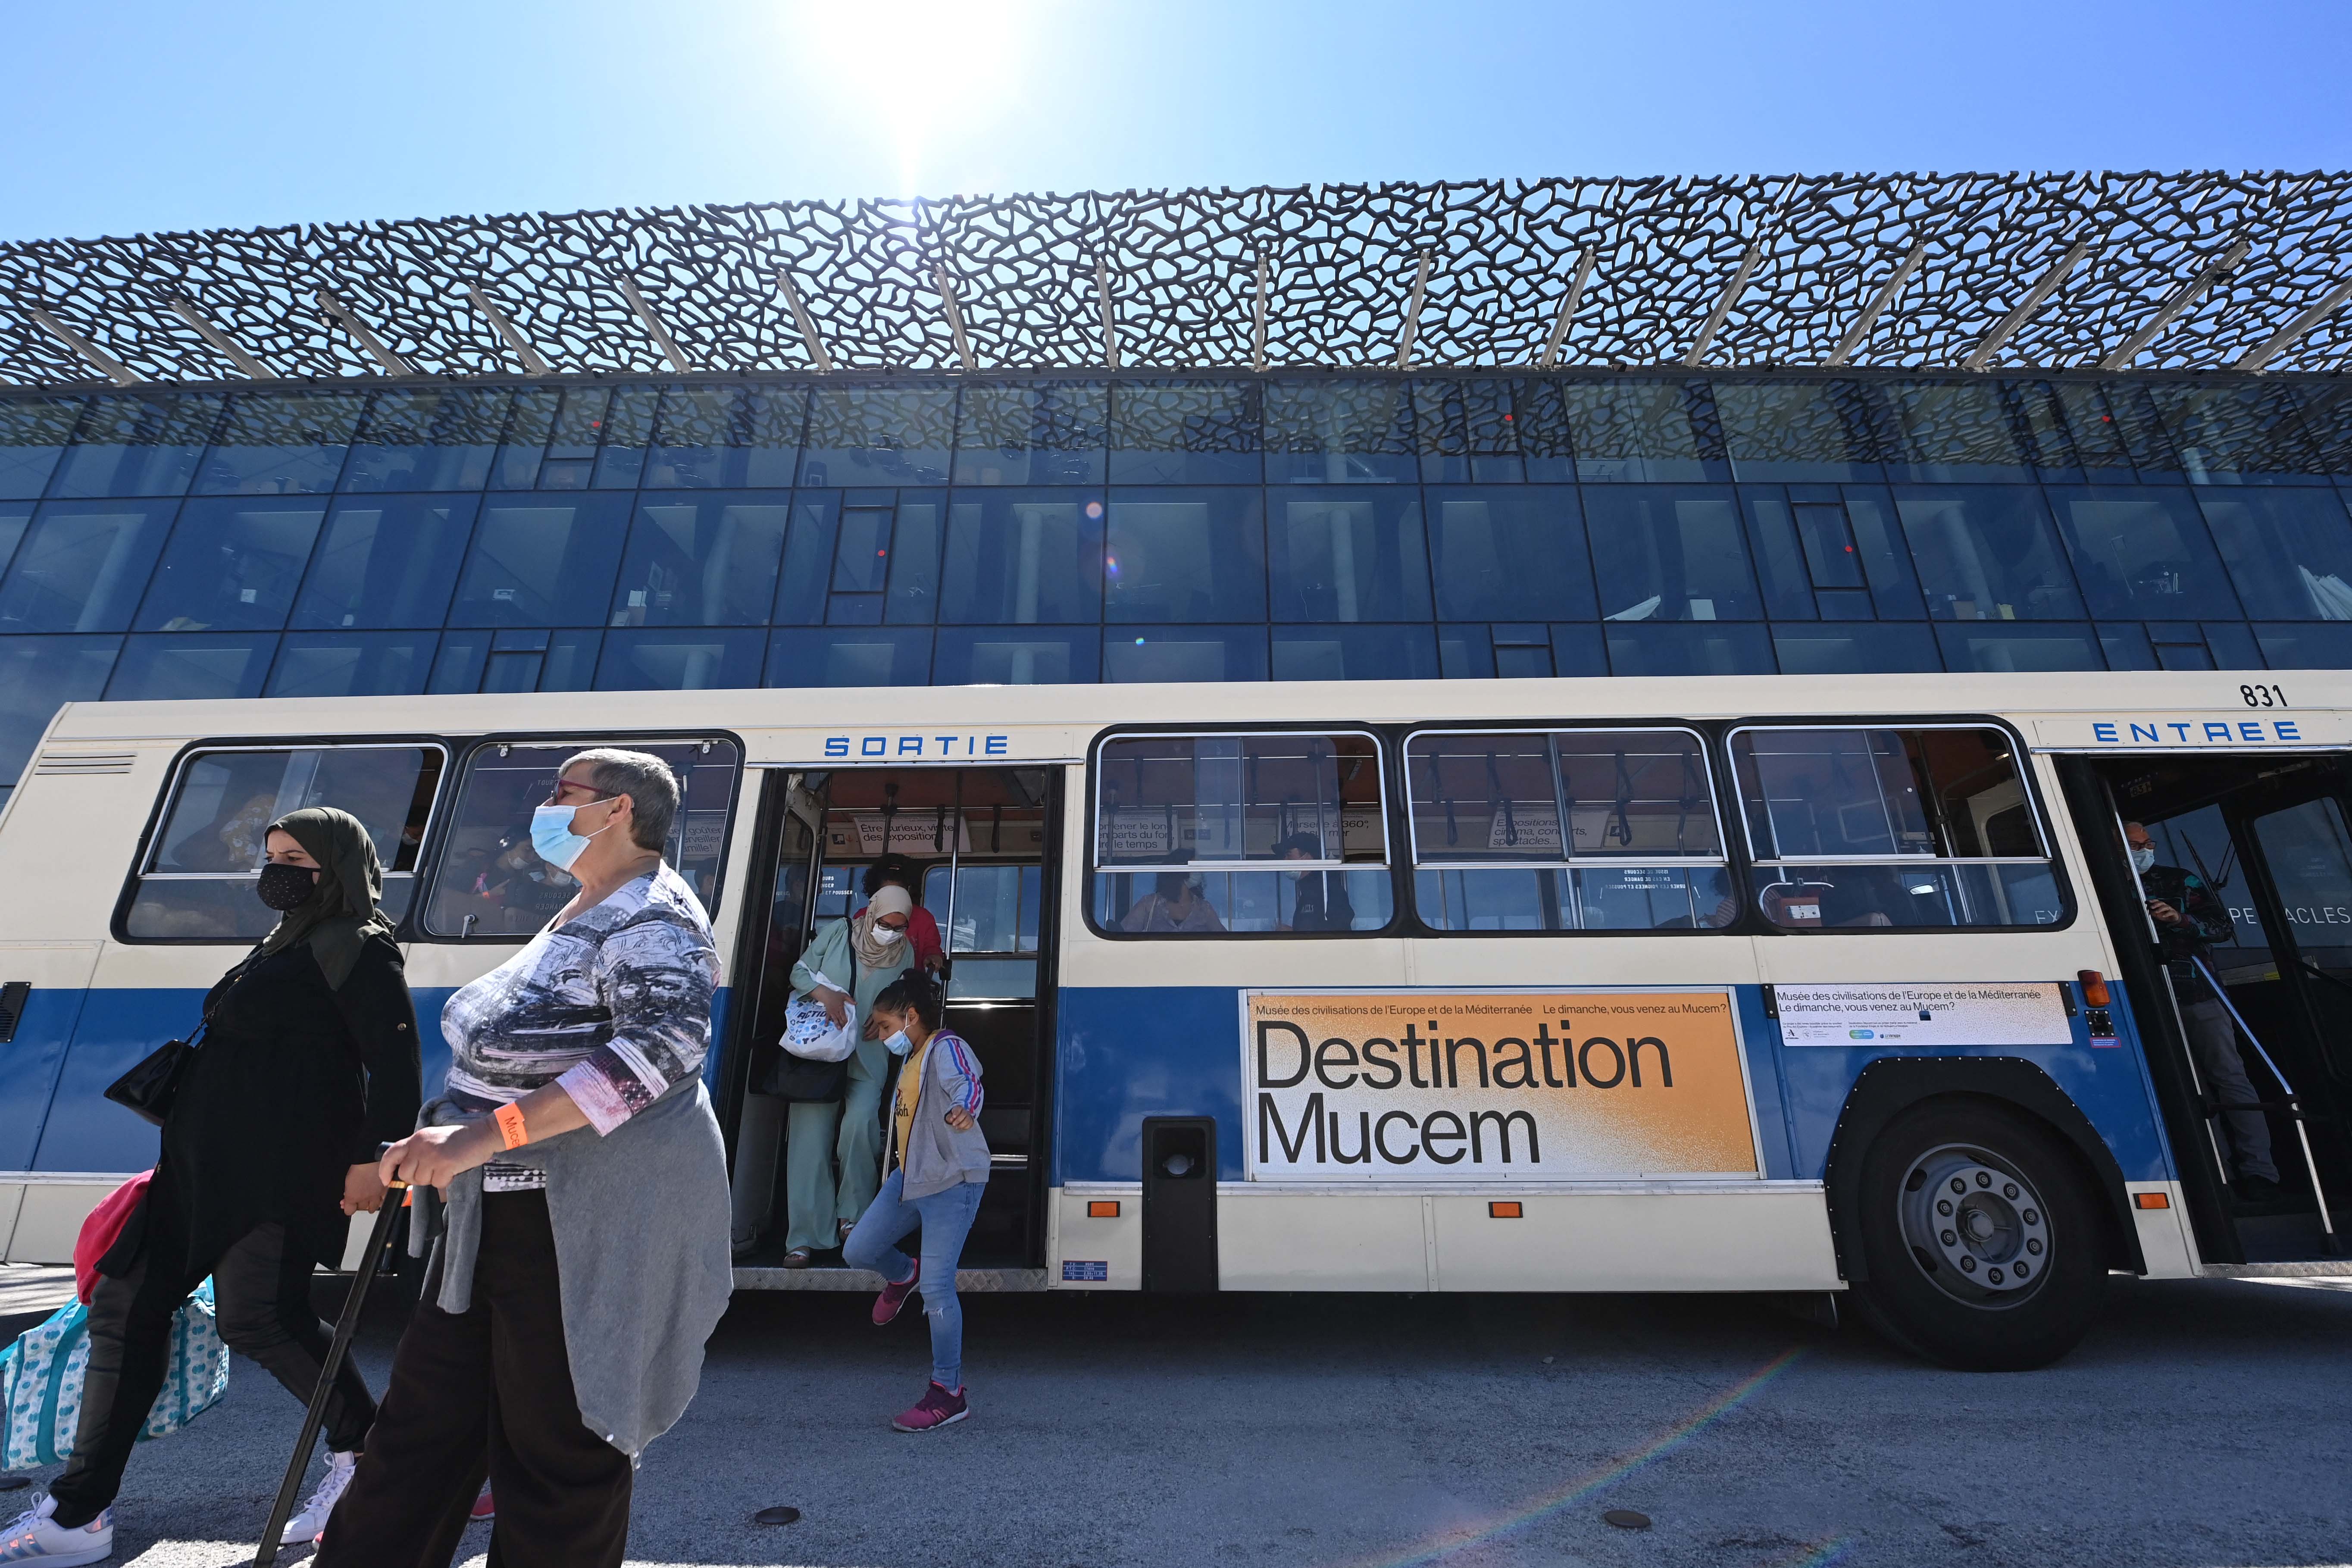 Special buses move people from the impoverished northern neighbourhoods in Marseille